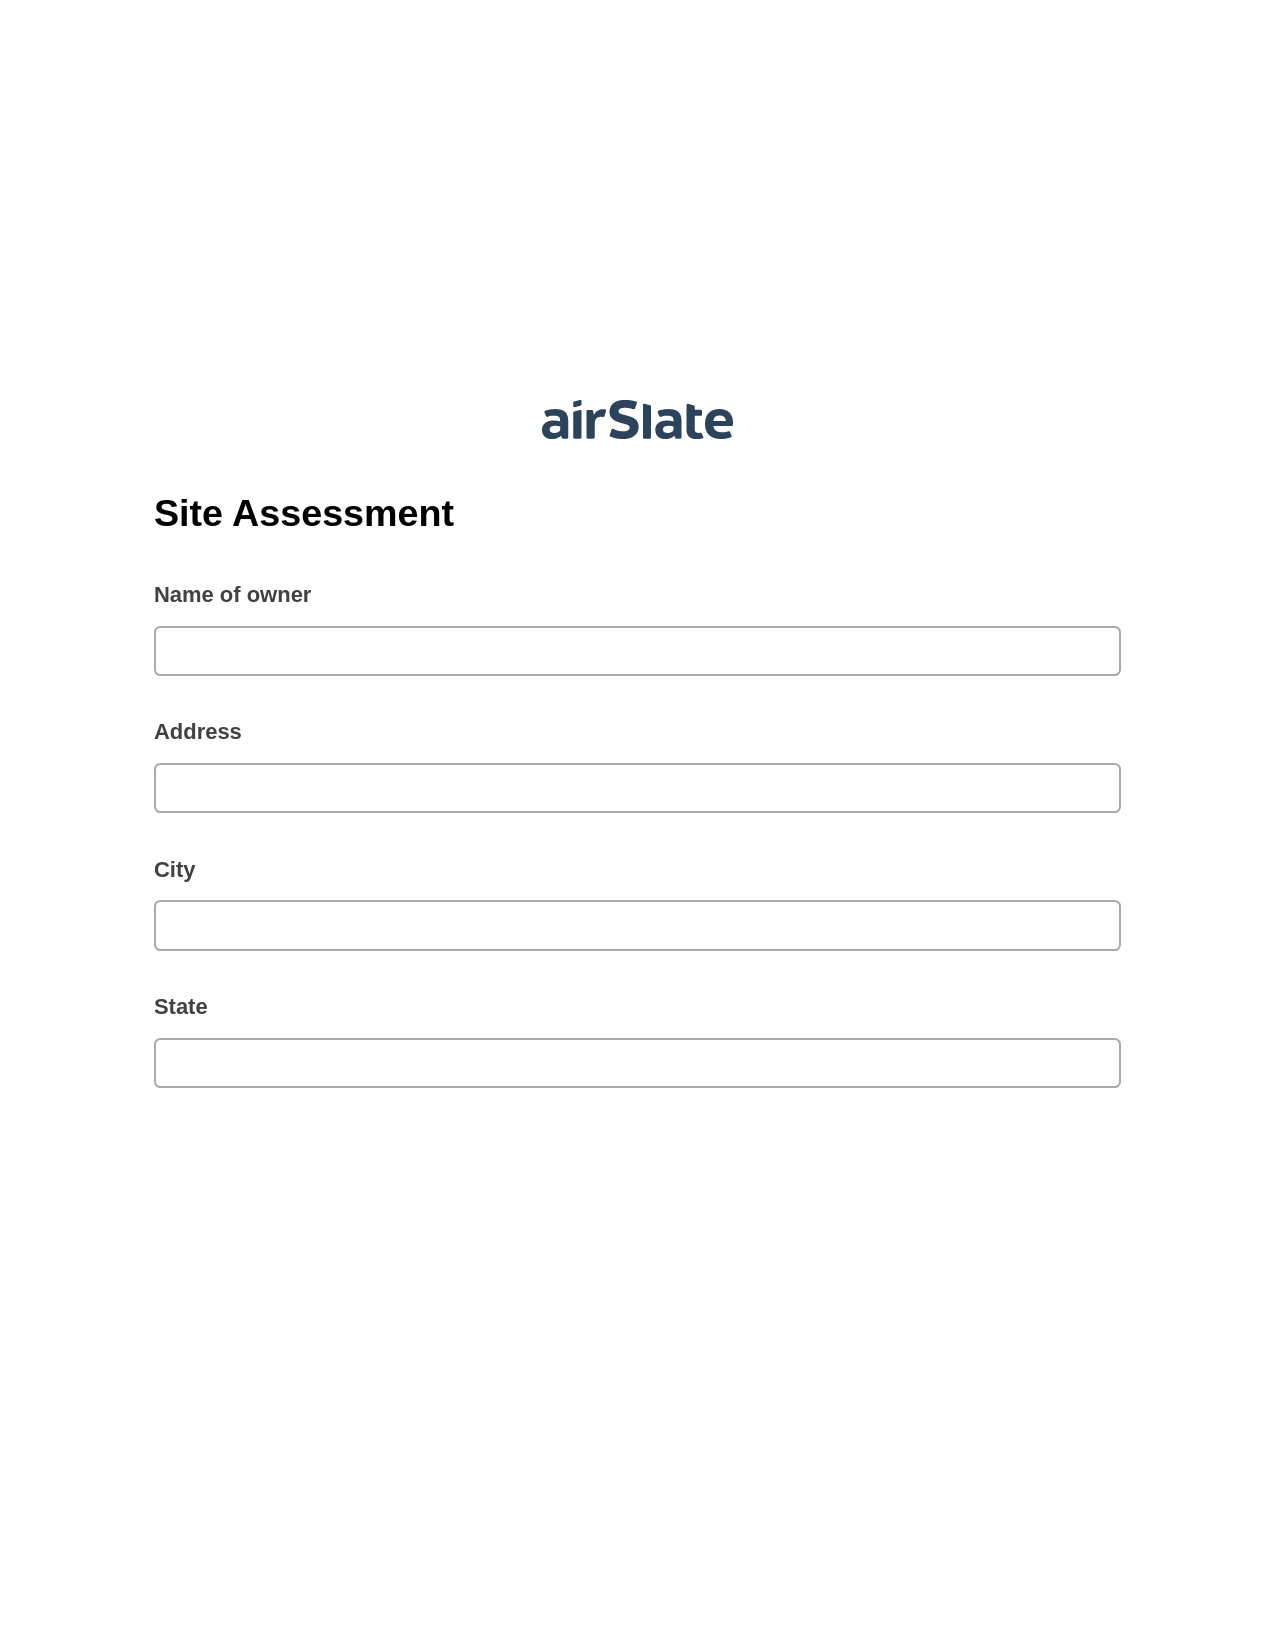 Site Assessment Pre-fill from Salesforce Record Bot, Create QuickBooks invoice Bot, Export to Formstack Documents Bot